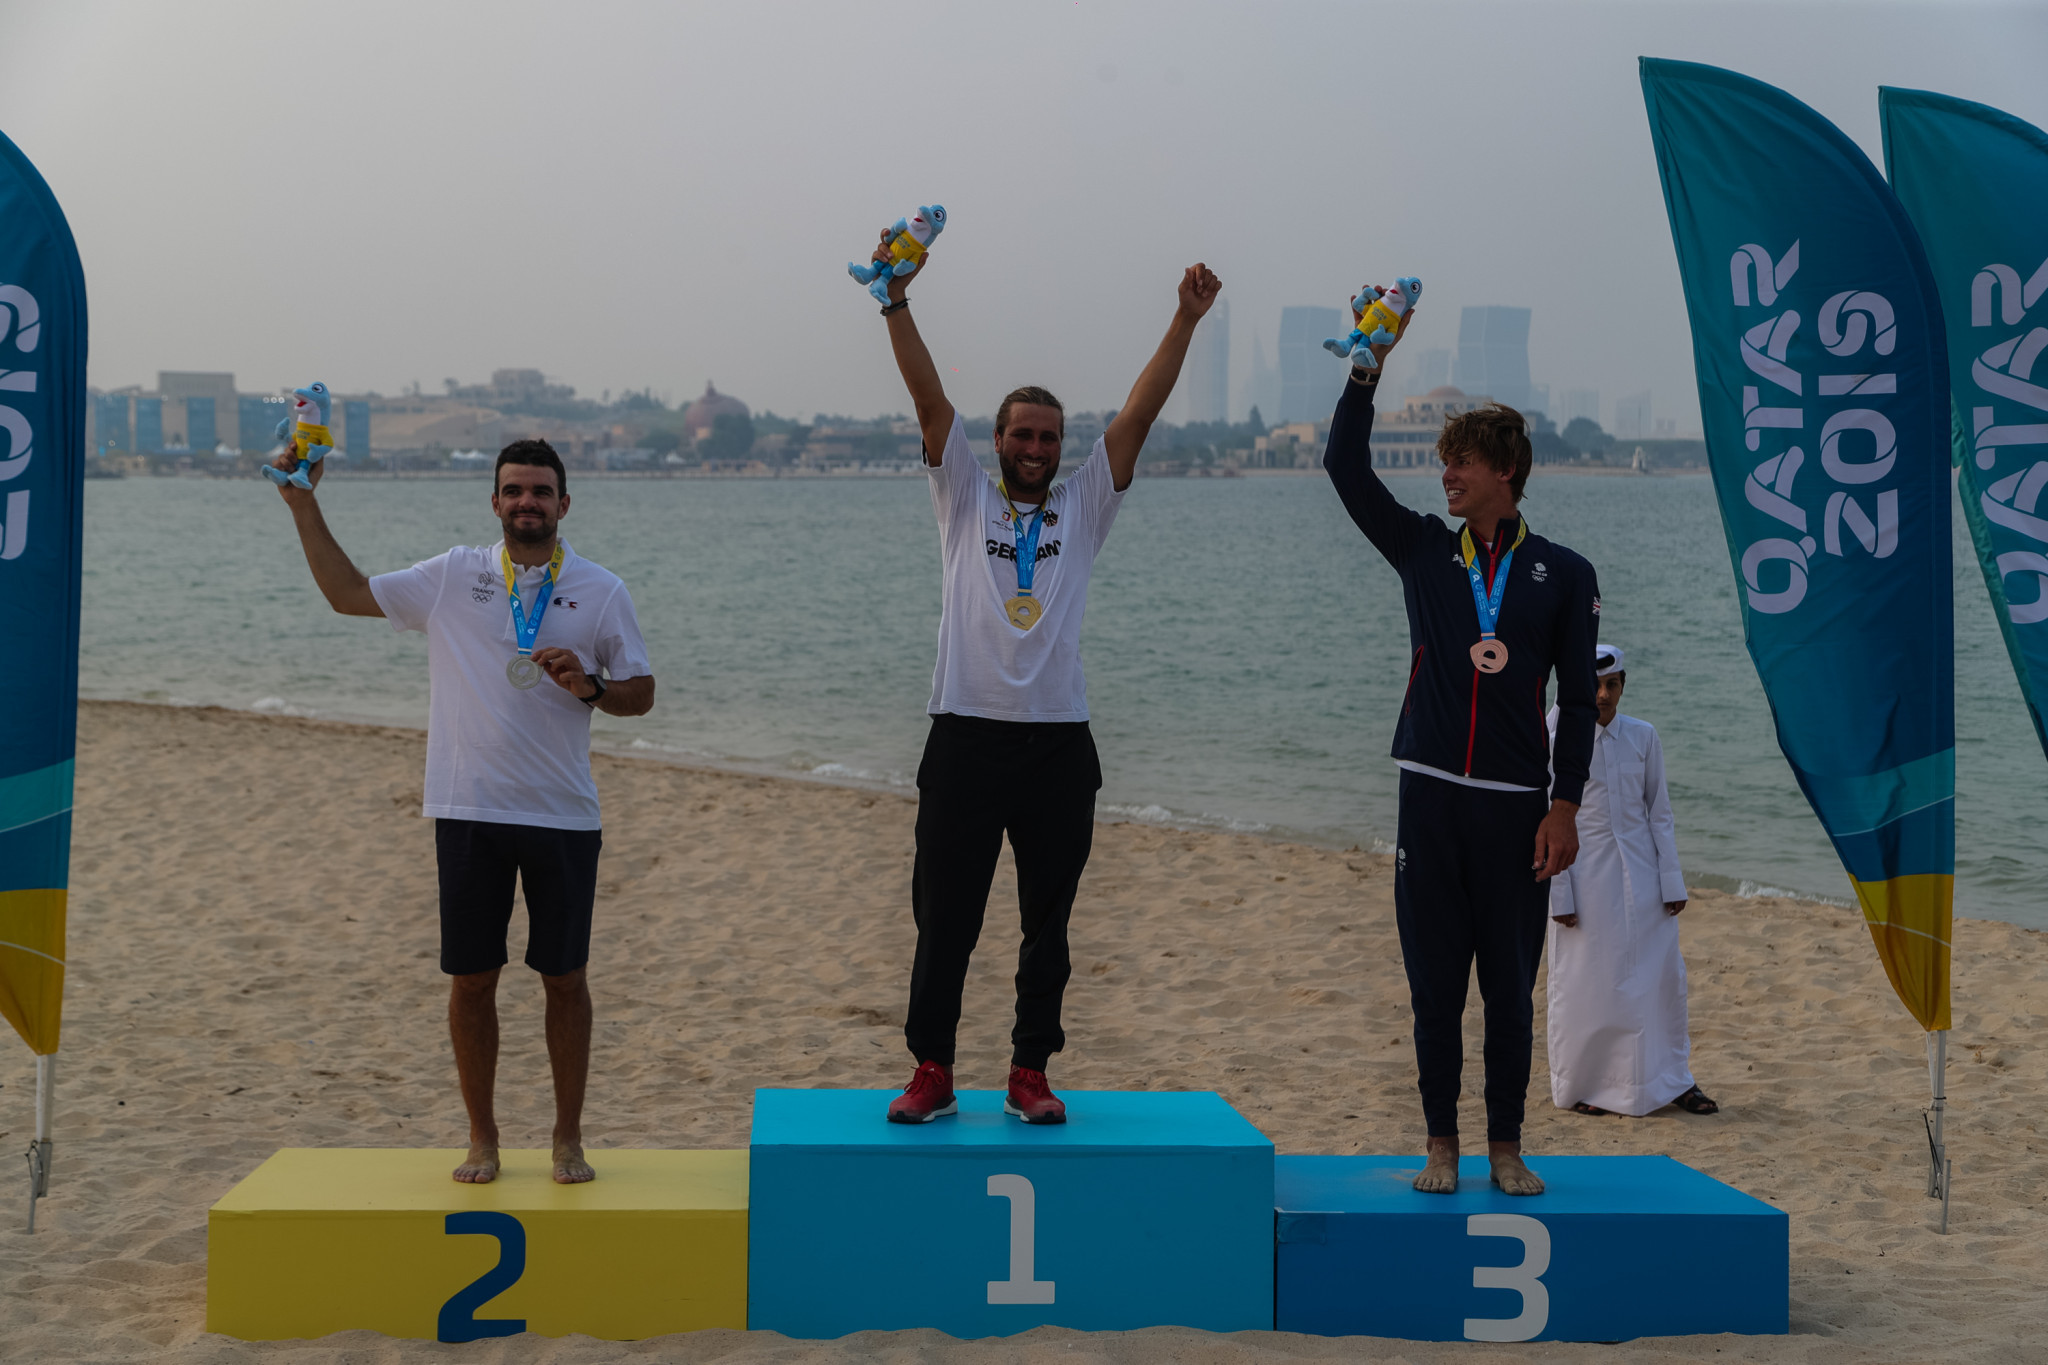 Kitefoil gold for Gruber at ANOC World Beach Games